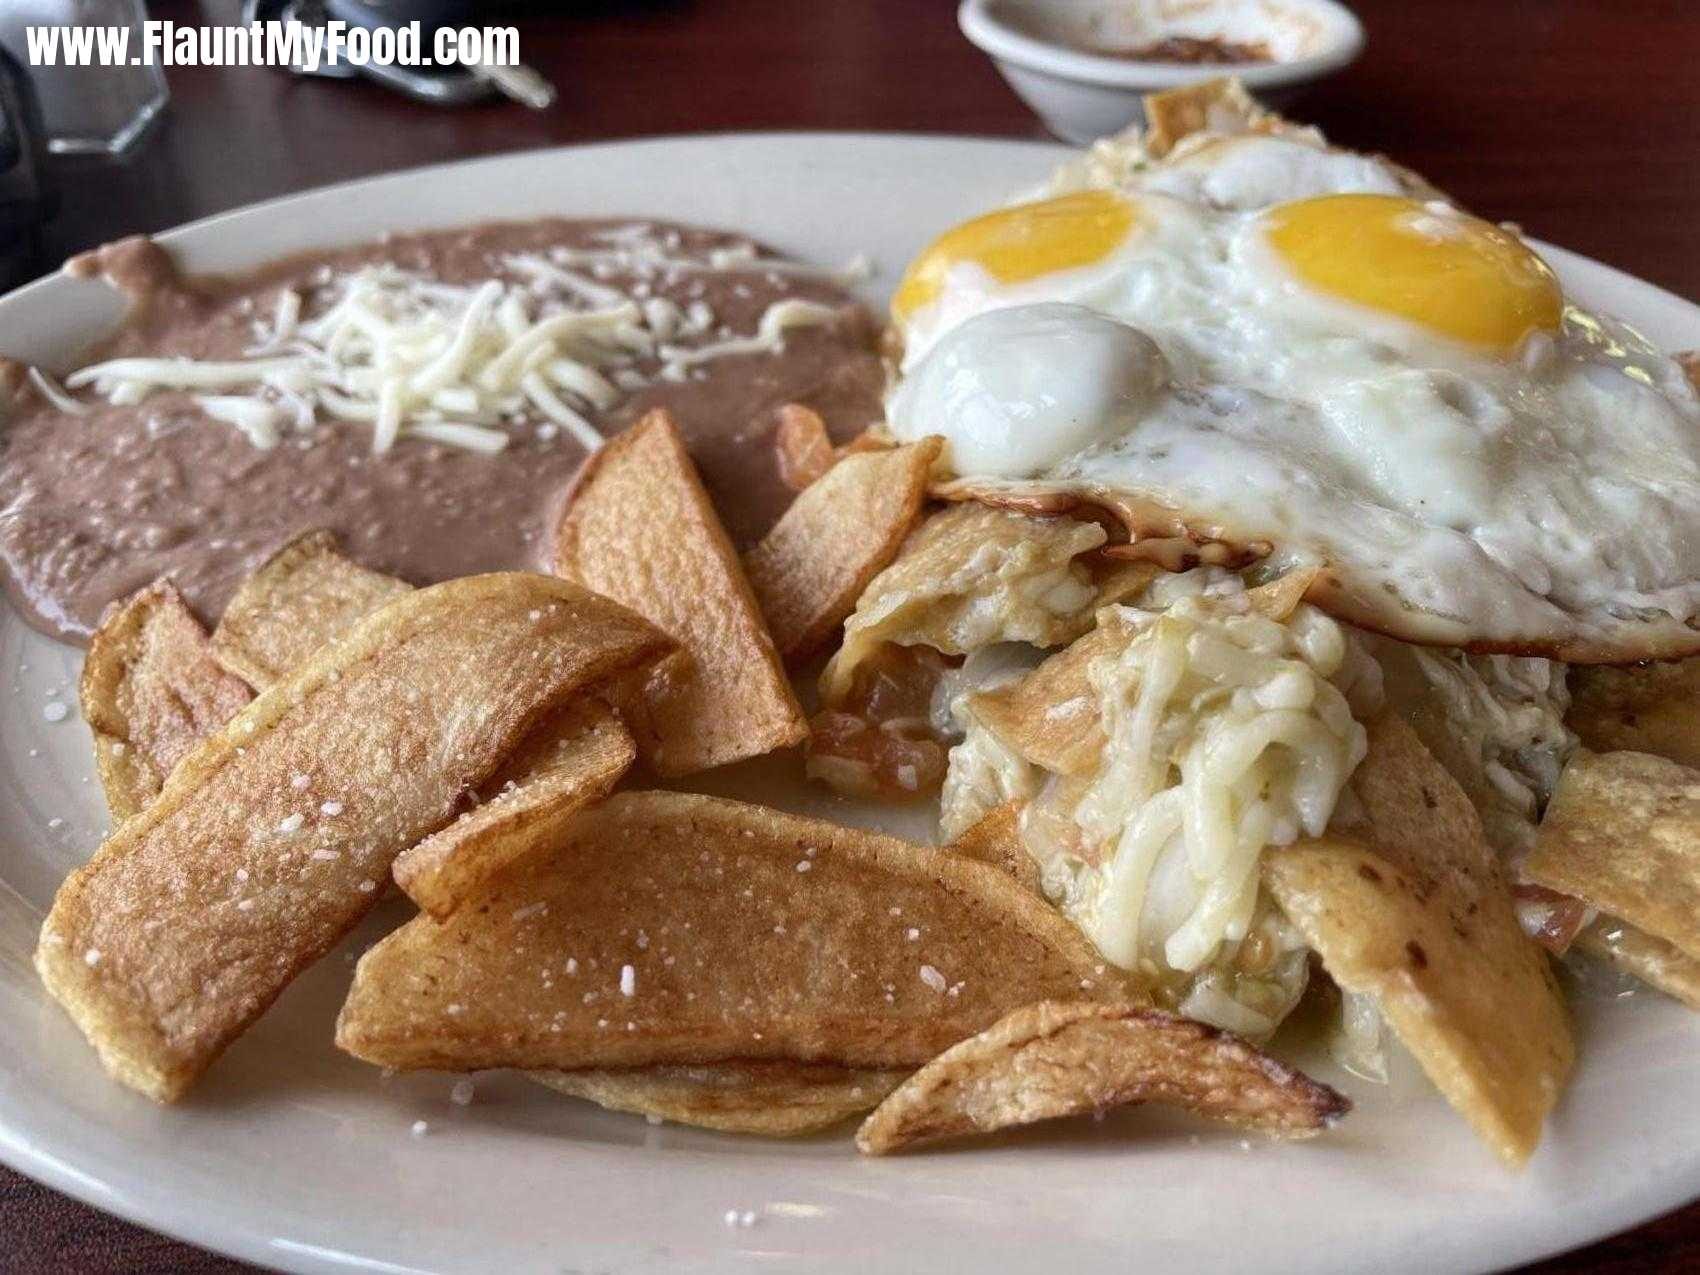 Toque Mexicano Fort Worth Texas Green ChilaquilesToque Mexicano Fort Worth Texas Green Chilaquiles